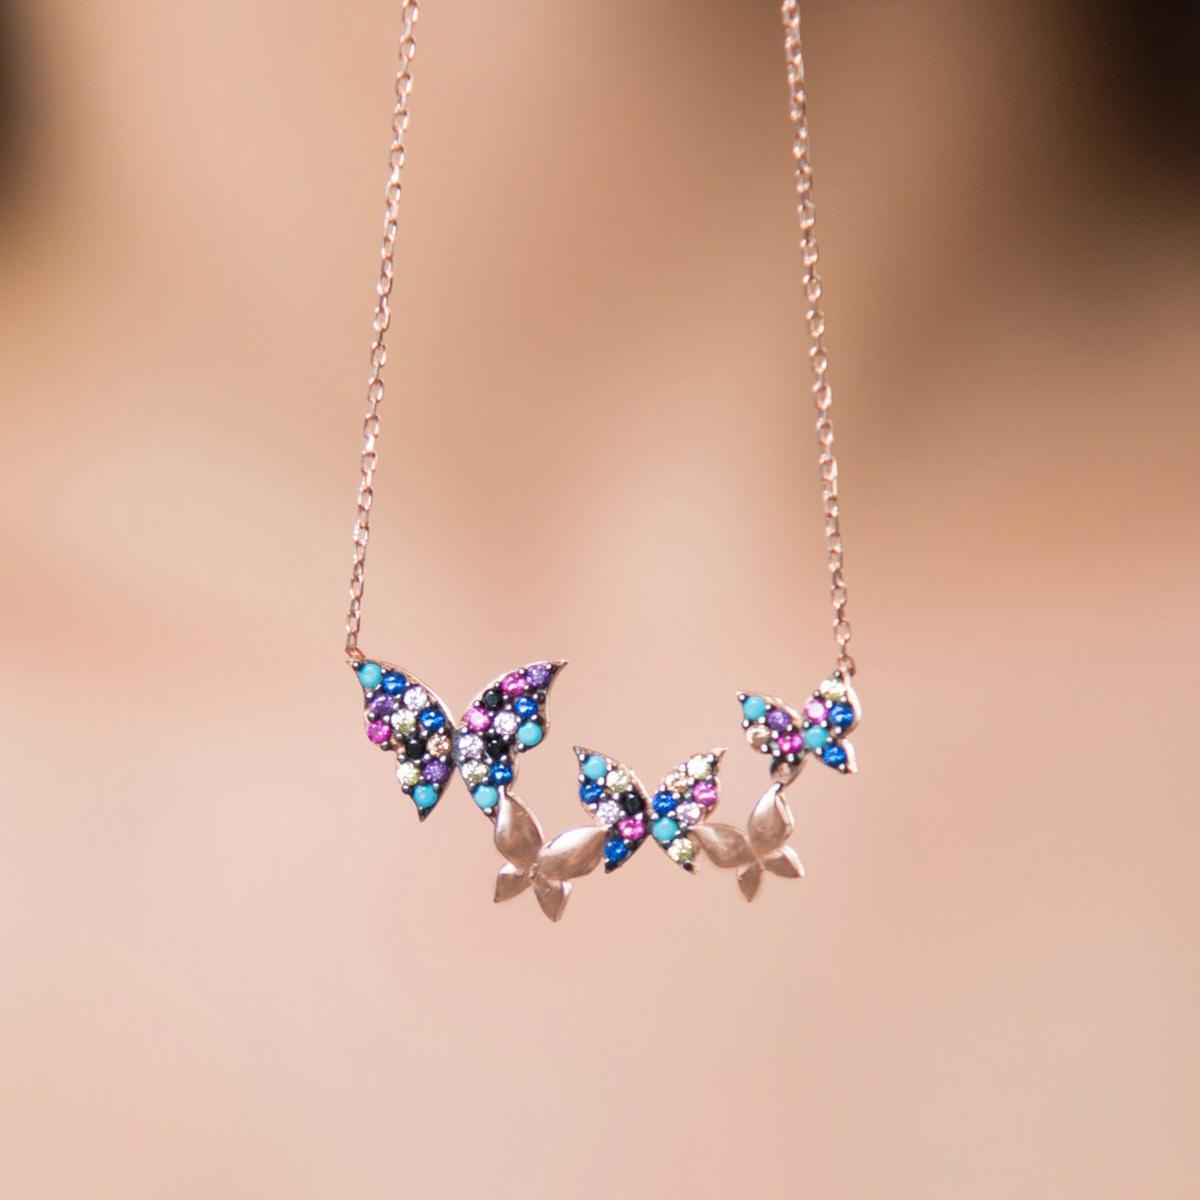 Butterfly Charm Necklace • Butterfly Pendant Necklace • Gift For Her - Trending Silver Gifts